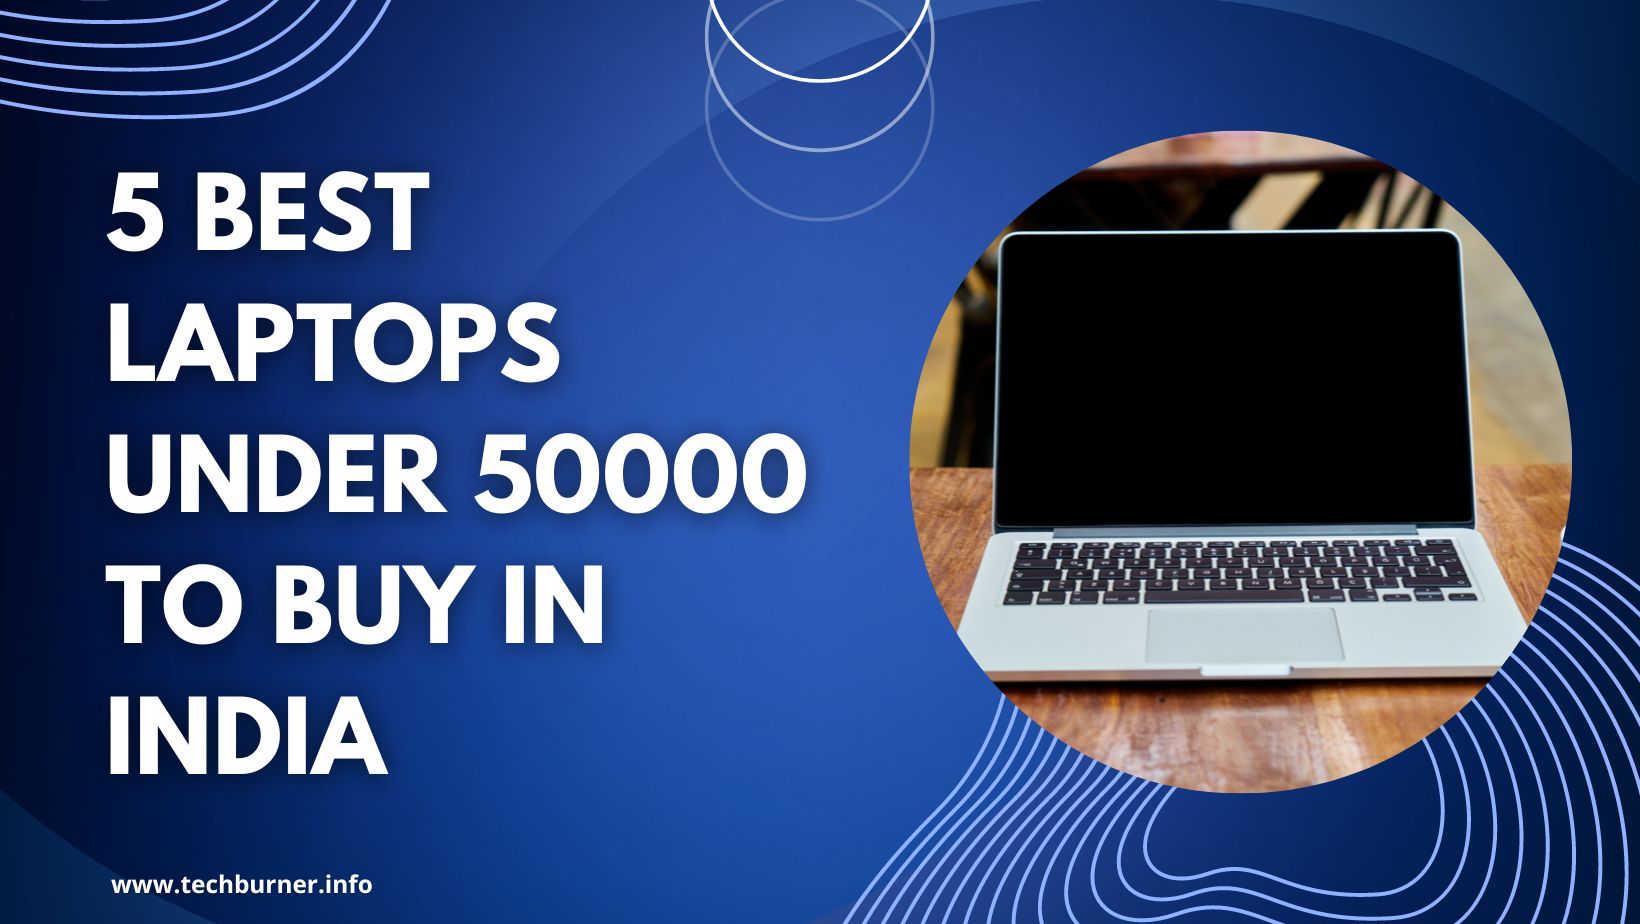 5 Best Laptops Under 50000 To Buy In India